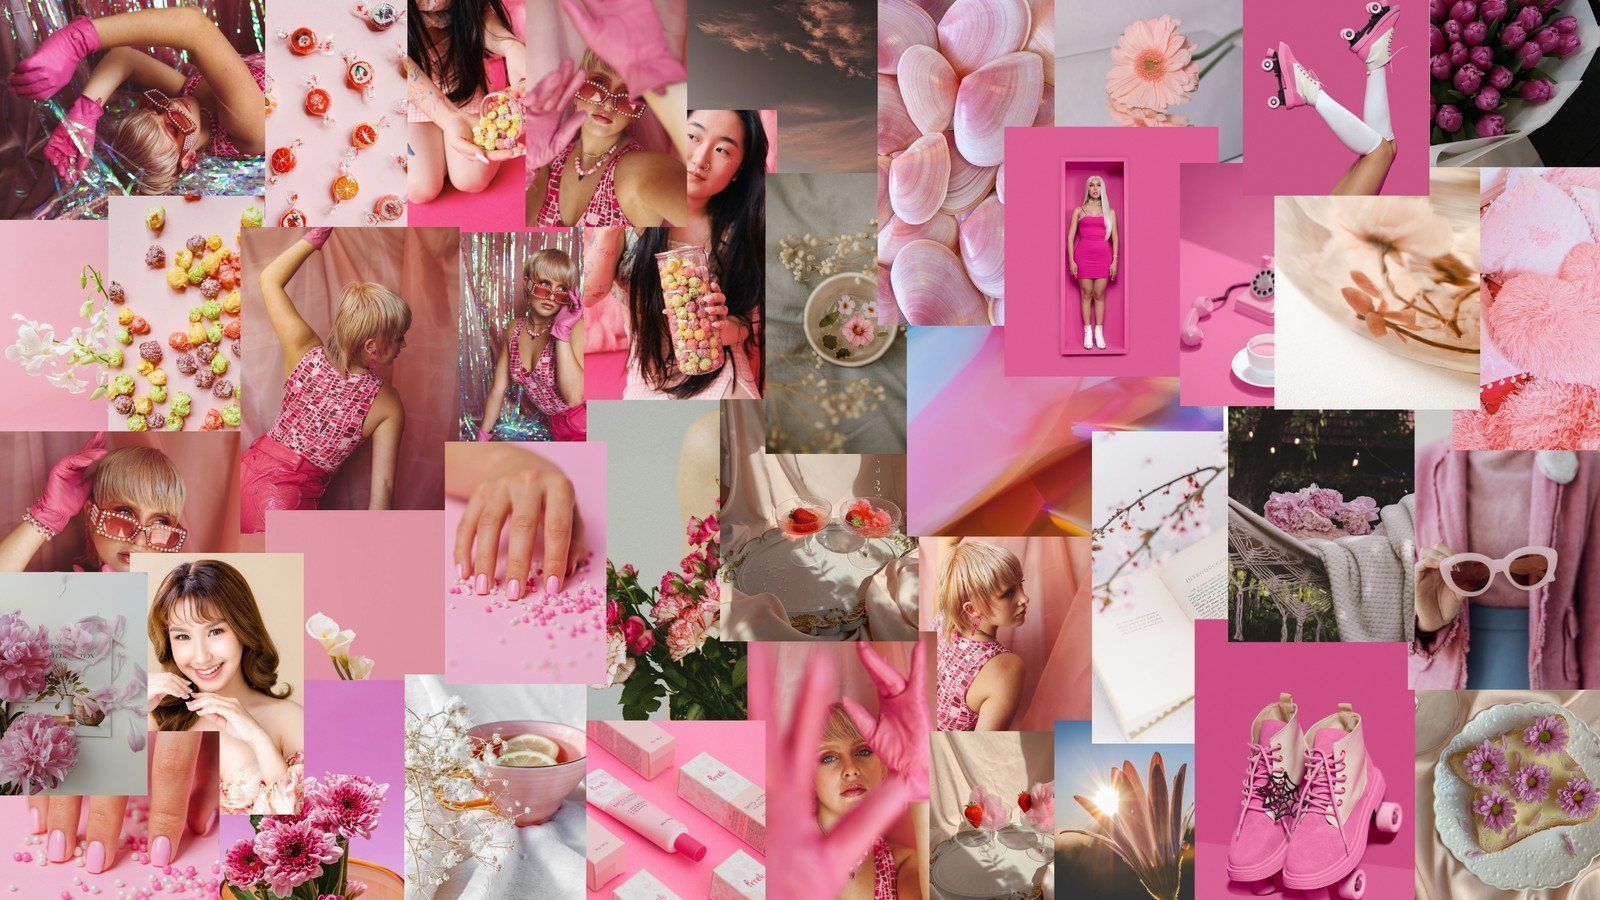 A collage of pink photos including flowers, people, and other items. - Pink, cute pink, light pink